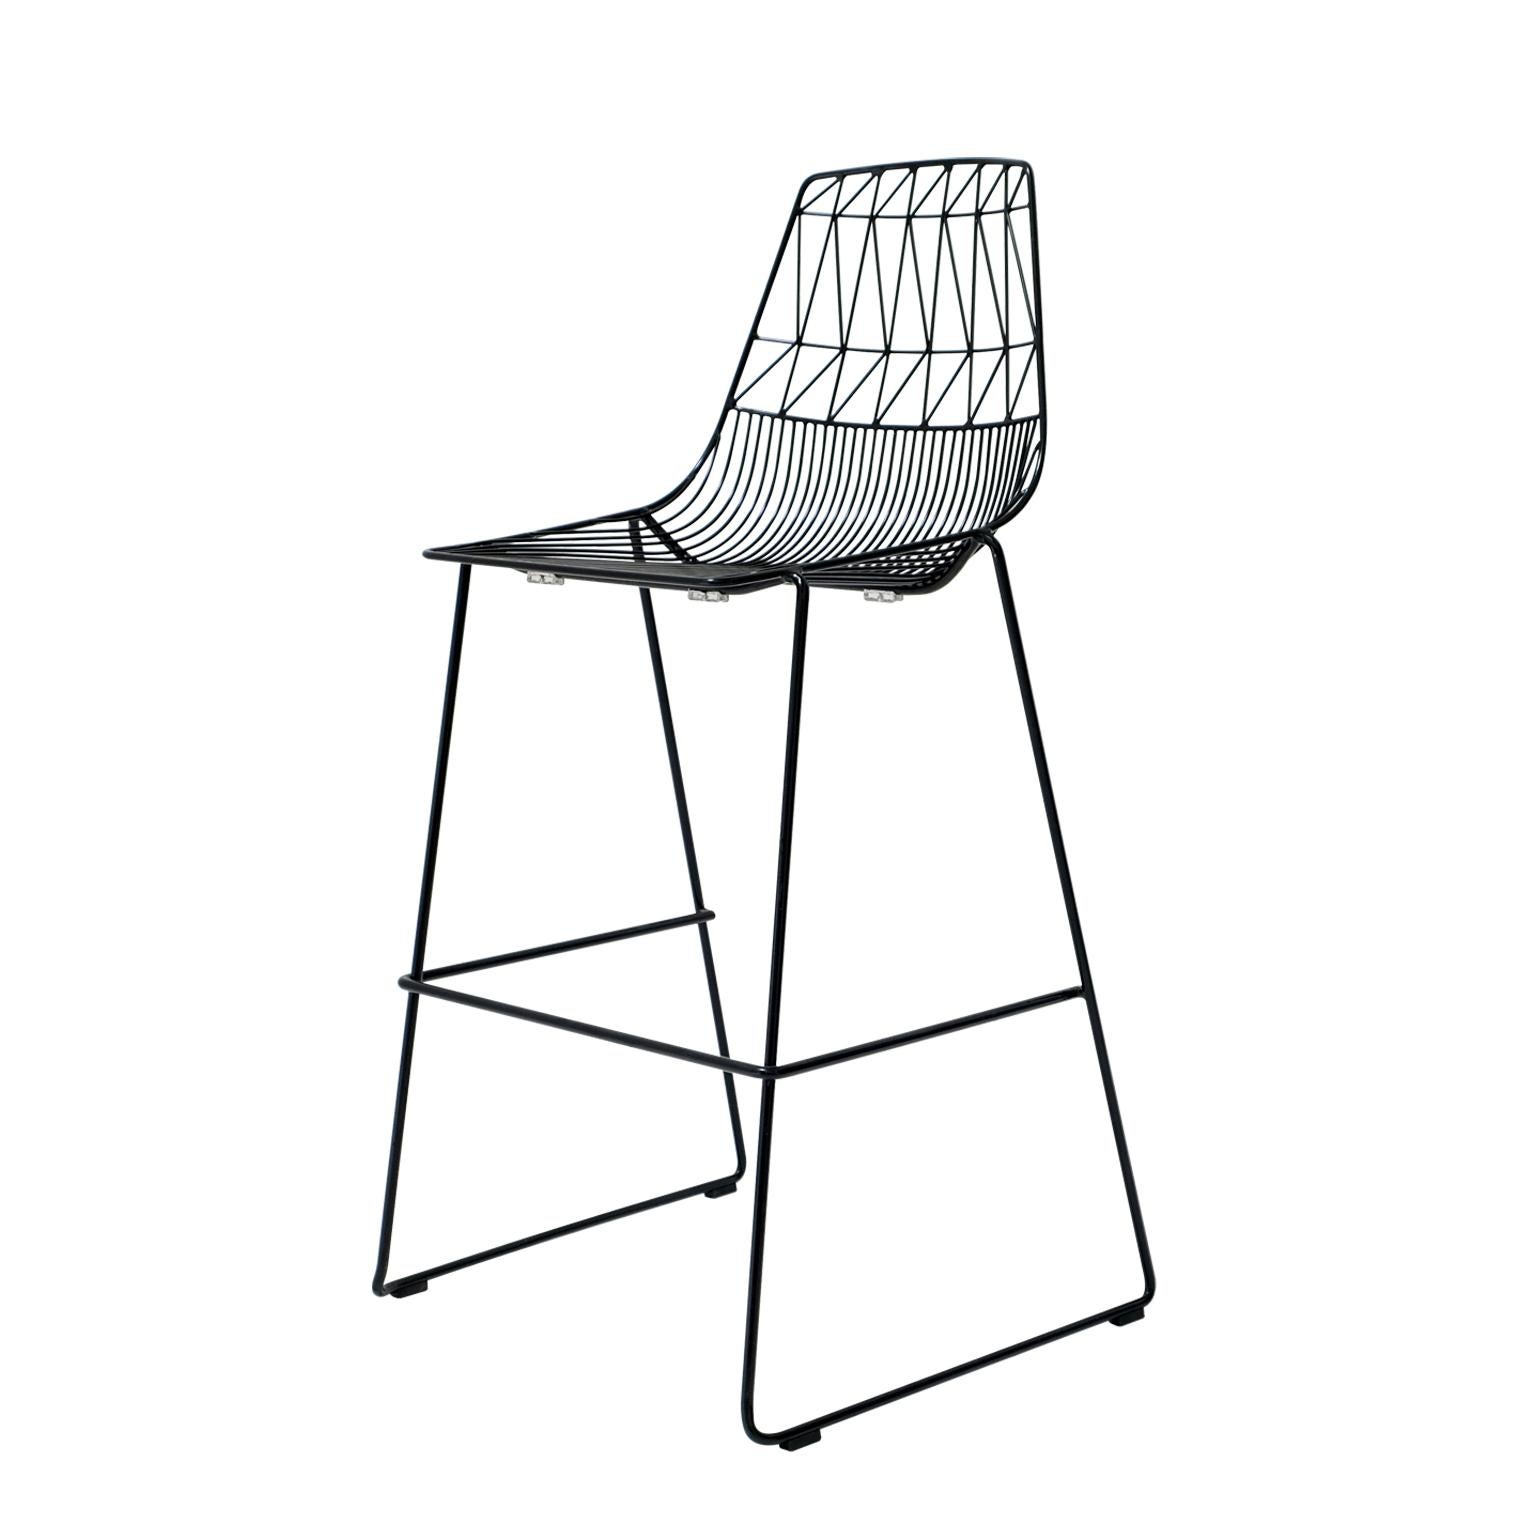 Bend Goods Wire Furniture
This unique wire bar stool is the ultimate combination of style and versatility. The Stacking Lucy bar stool combines the classic modern wire design of the Lucy chair from Bend Goods, with a built to last stackable shape